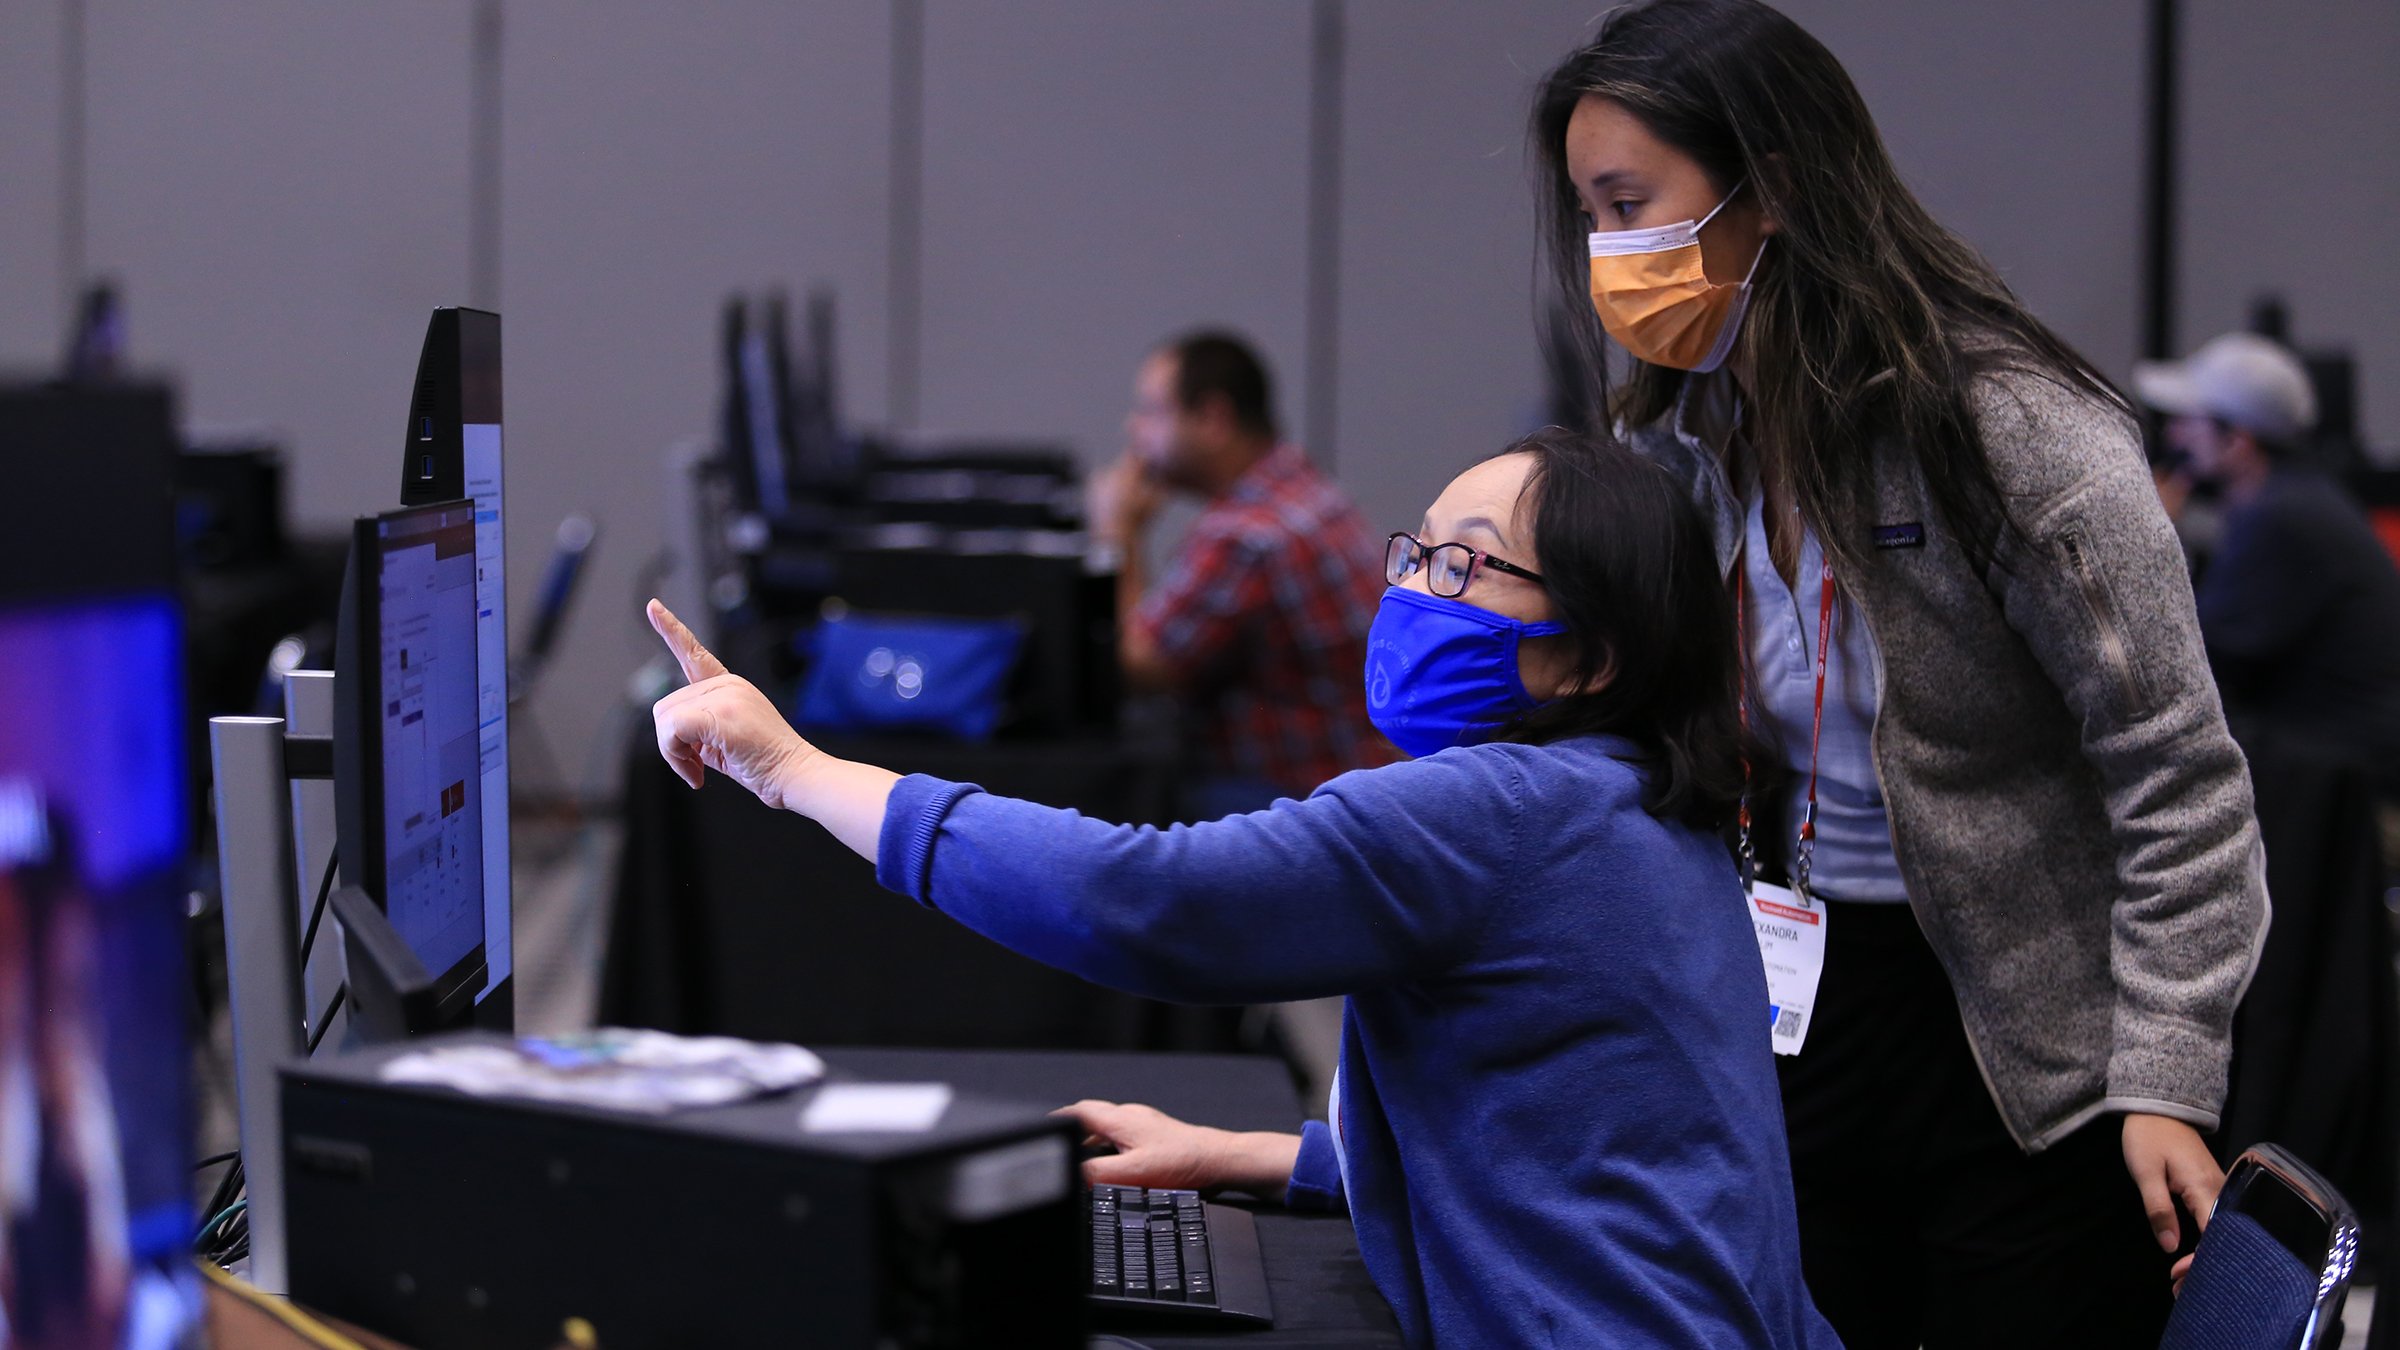 Two people wearing masks in a session looking at a monitor at Automation Fair PSUG